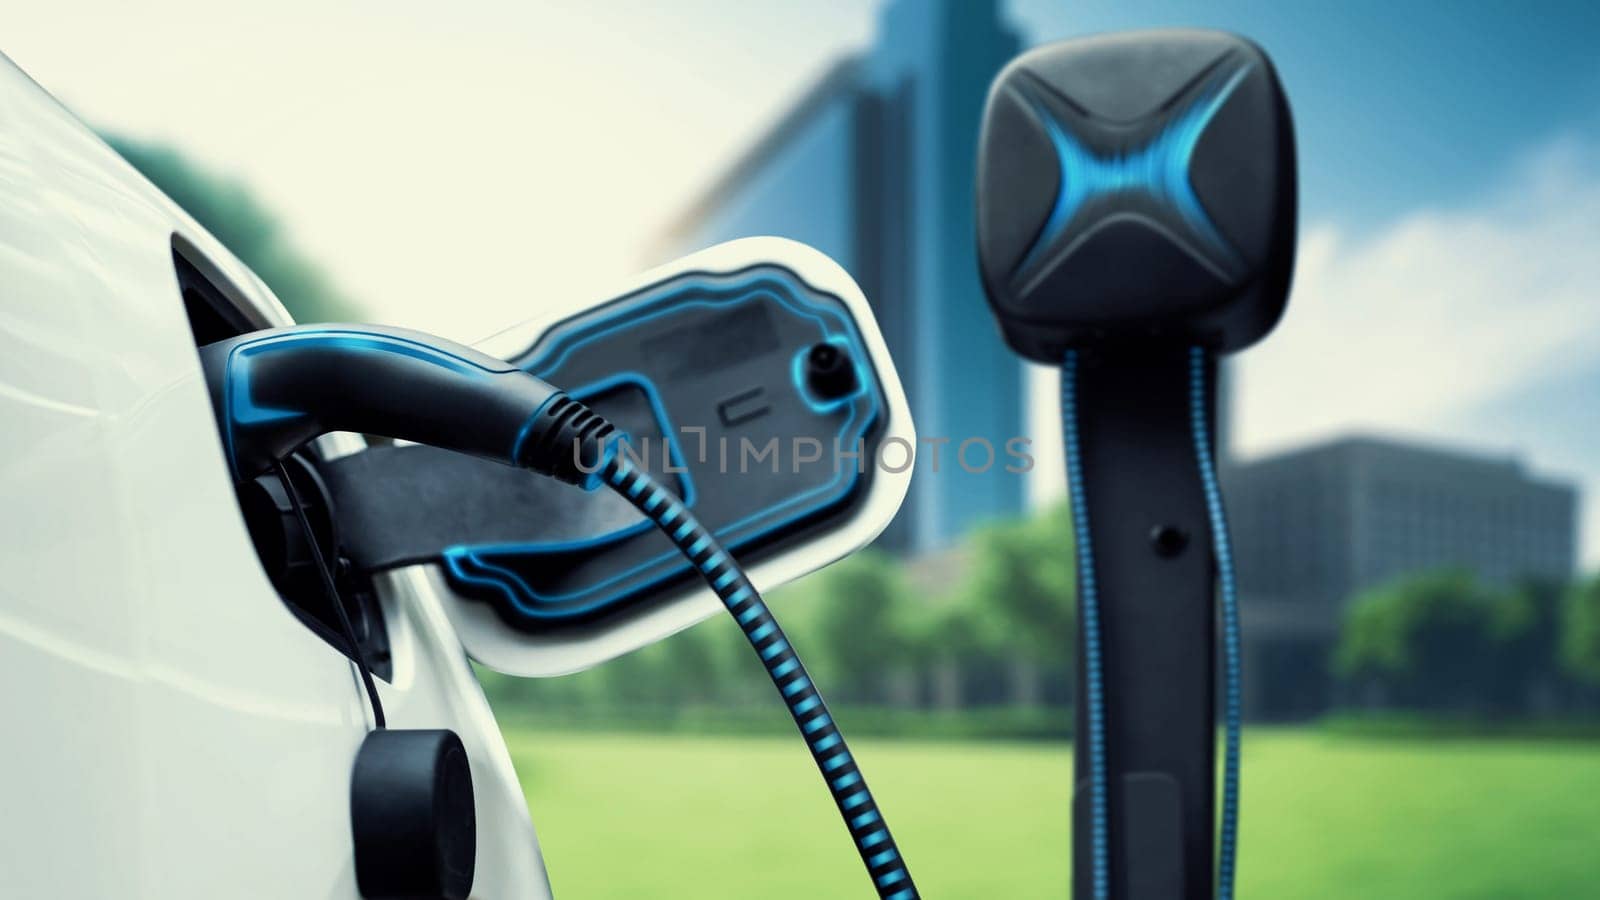 Electric car plugged in with charging station to recharge battery. Peruse by biancoblue